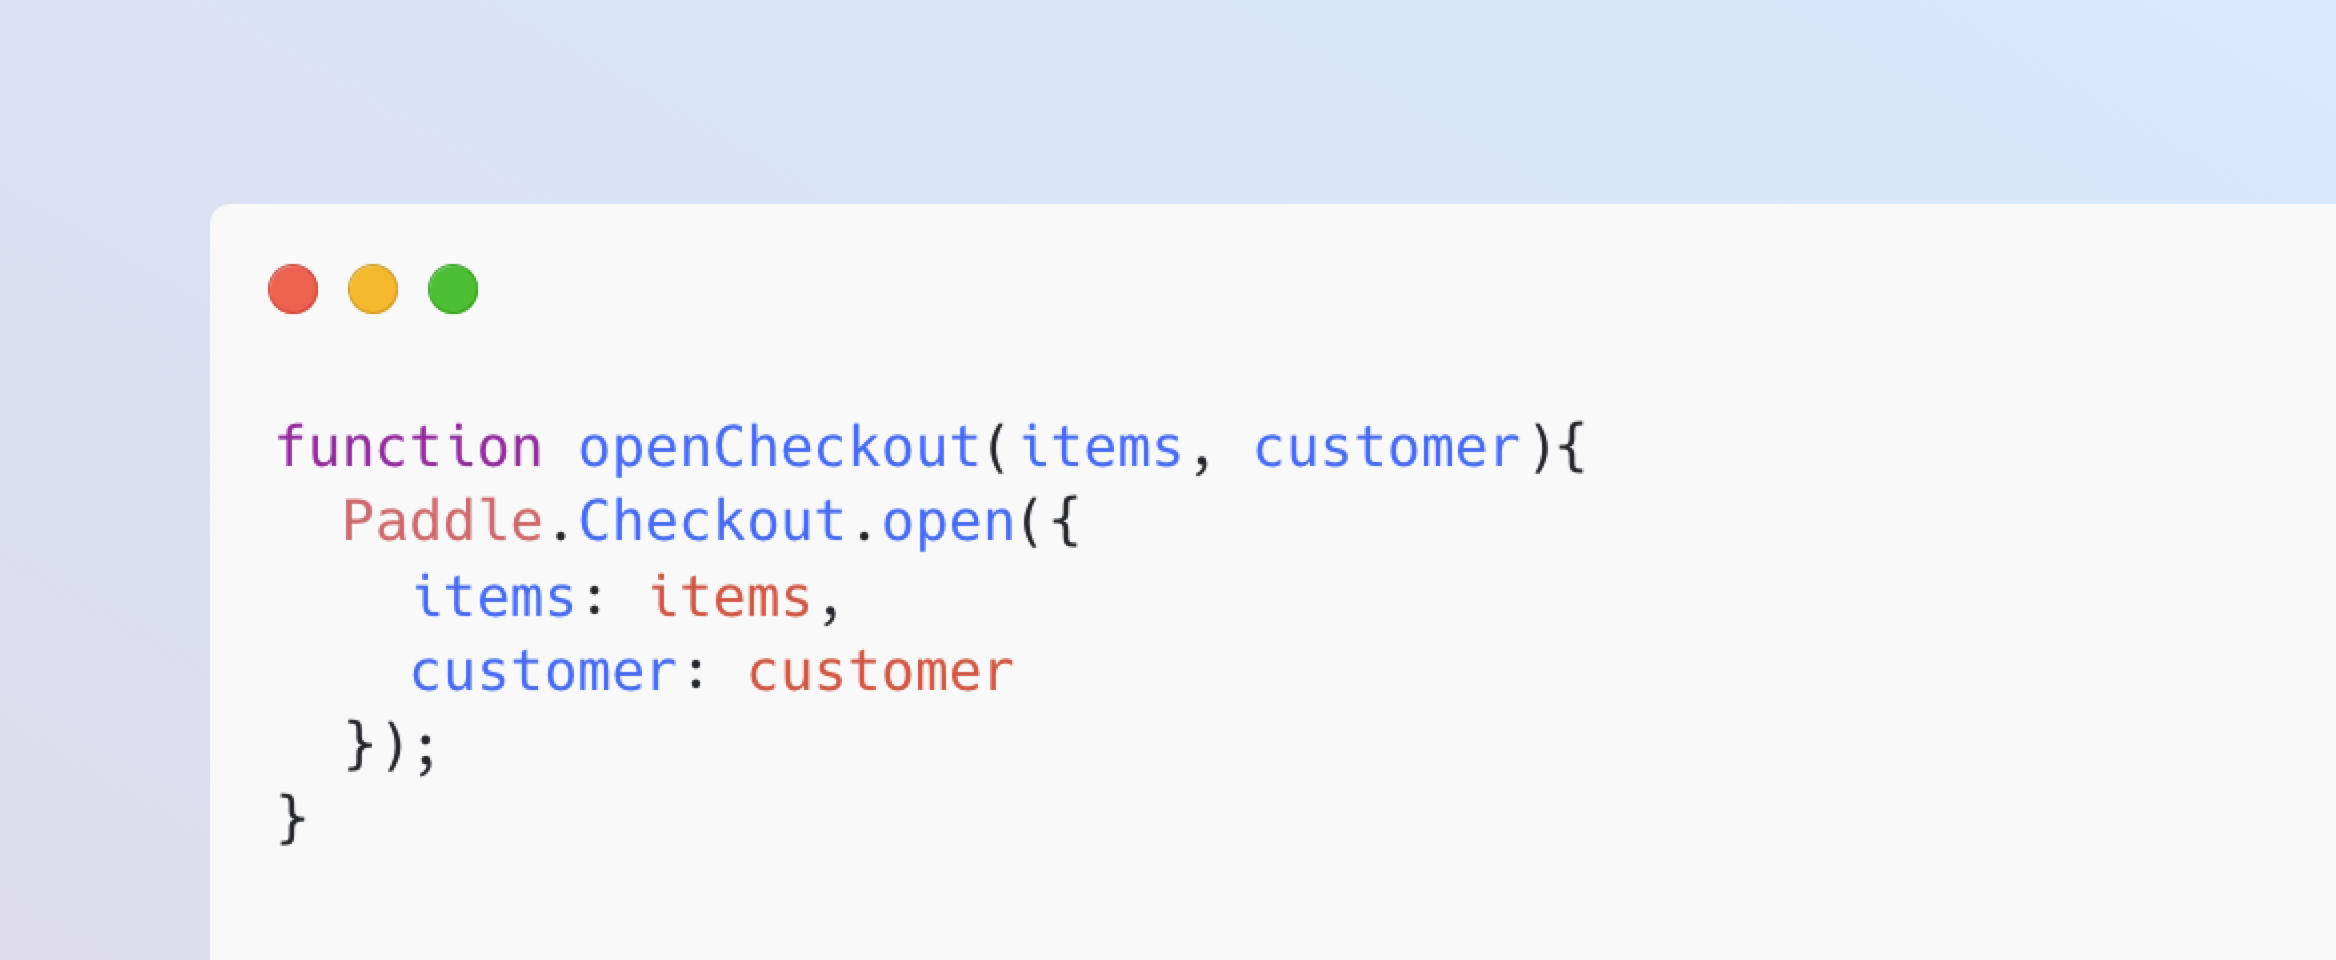 Code illustration showing an openCheckout() function. It's cut off, so you can't make out the full code.